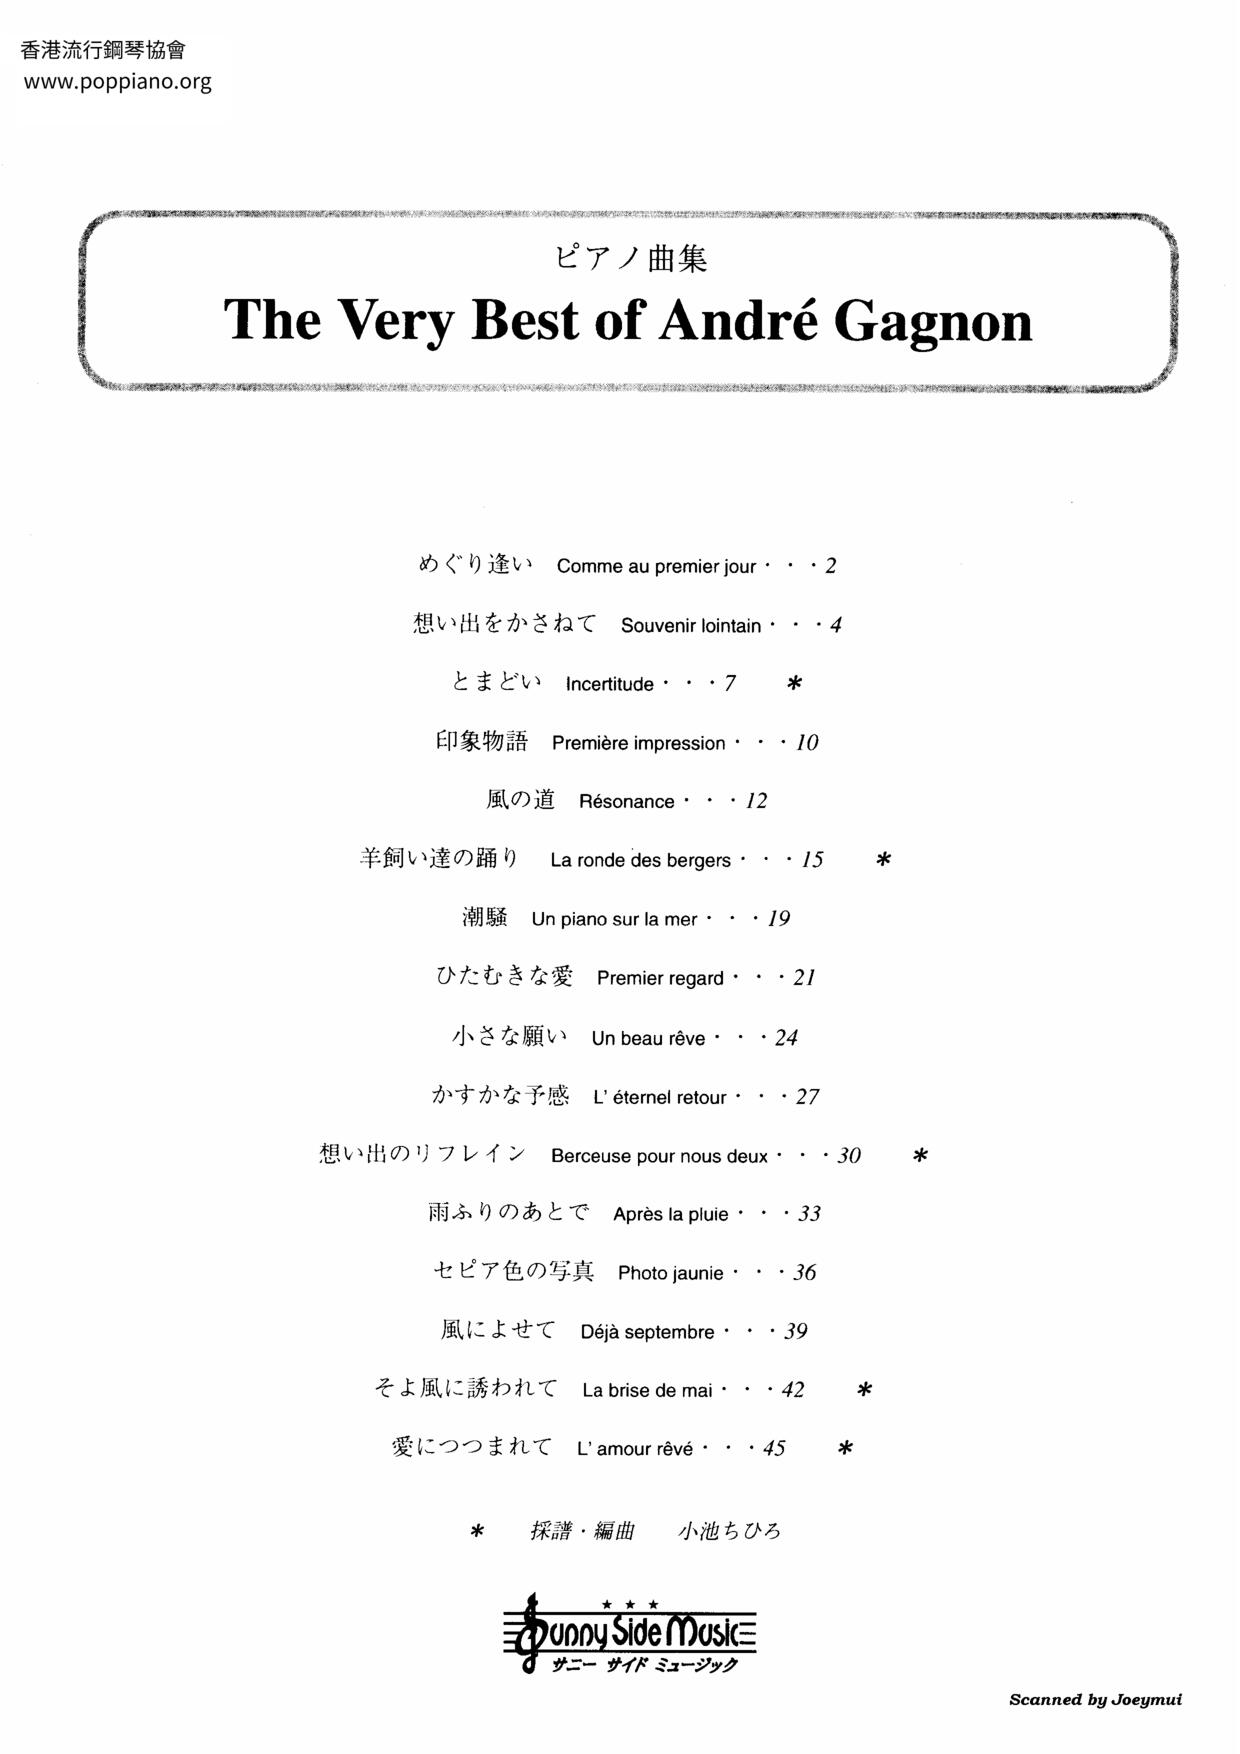 The Very Best of Andre Gagnon 46 pagesピアノ譜